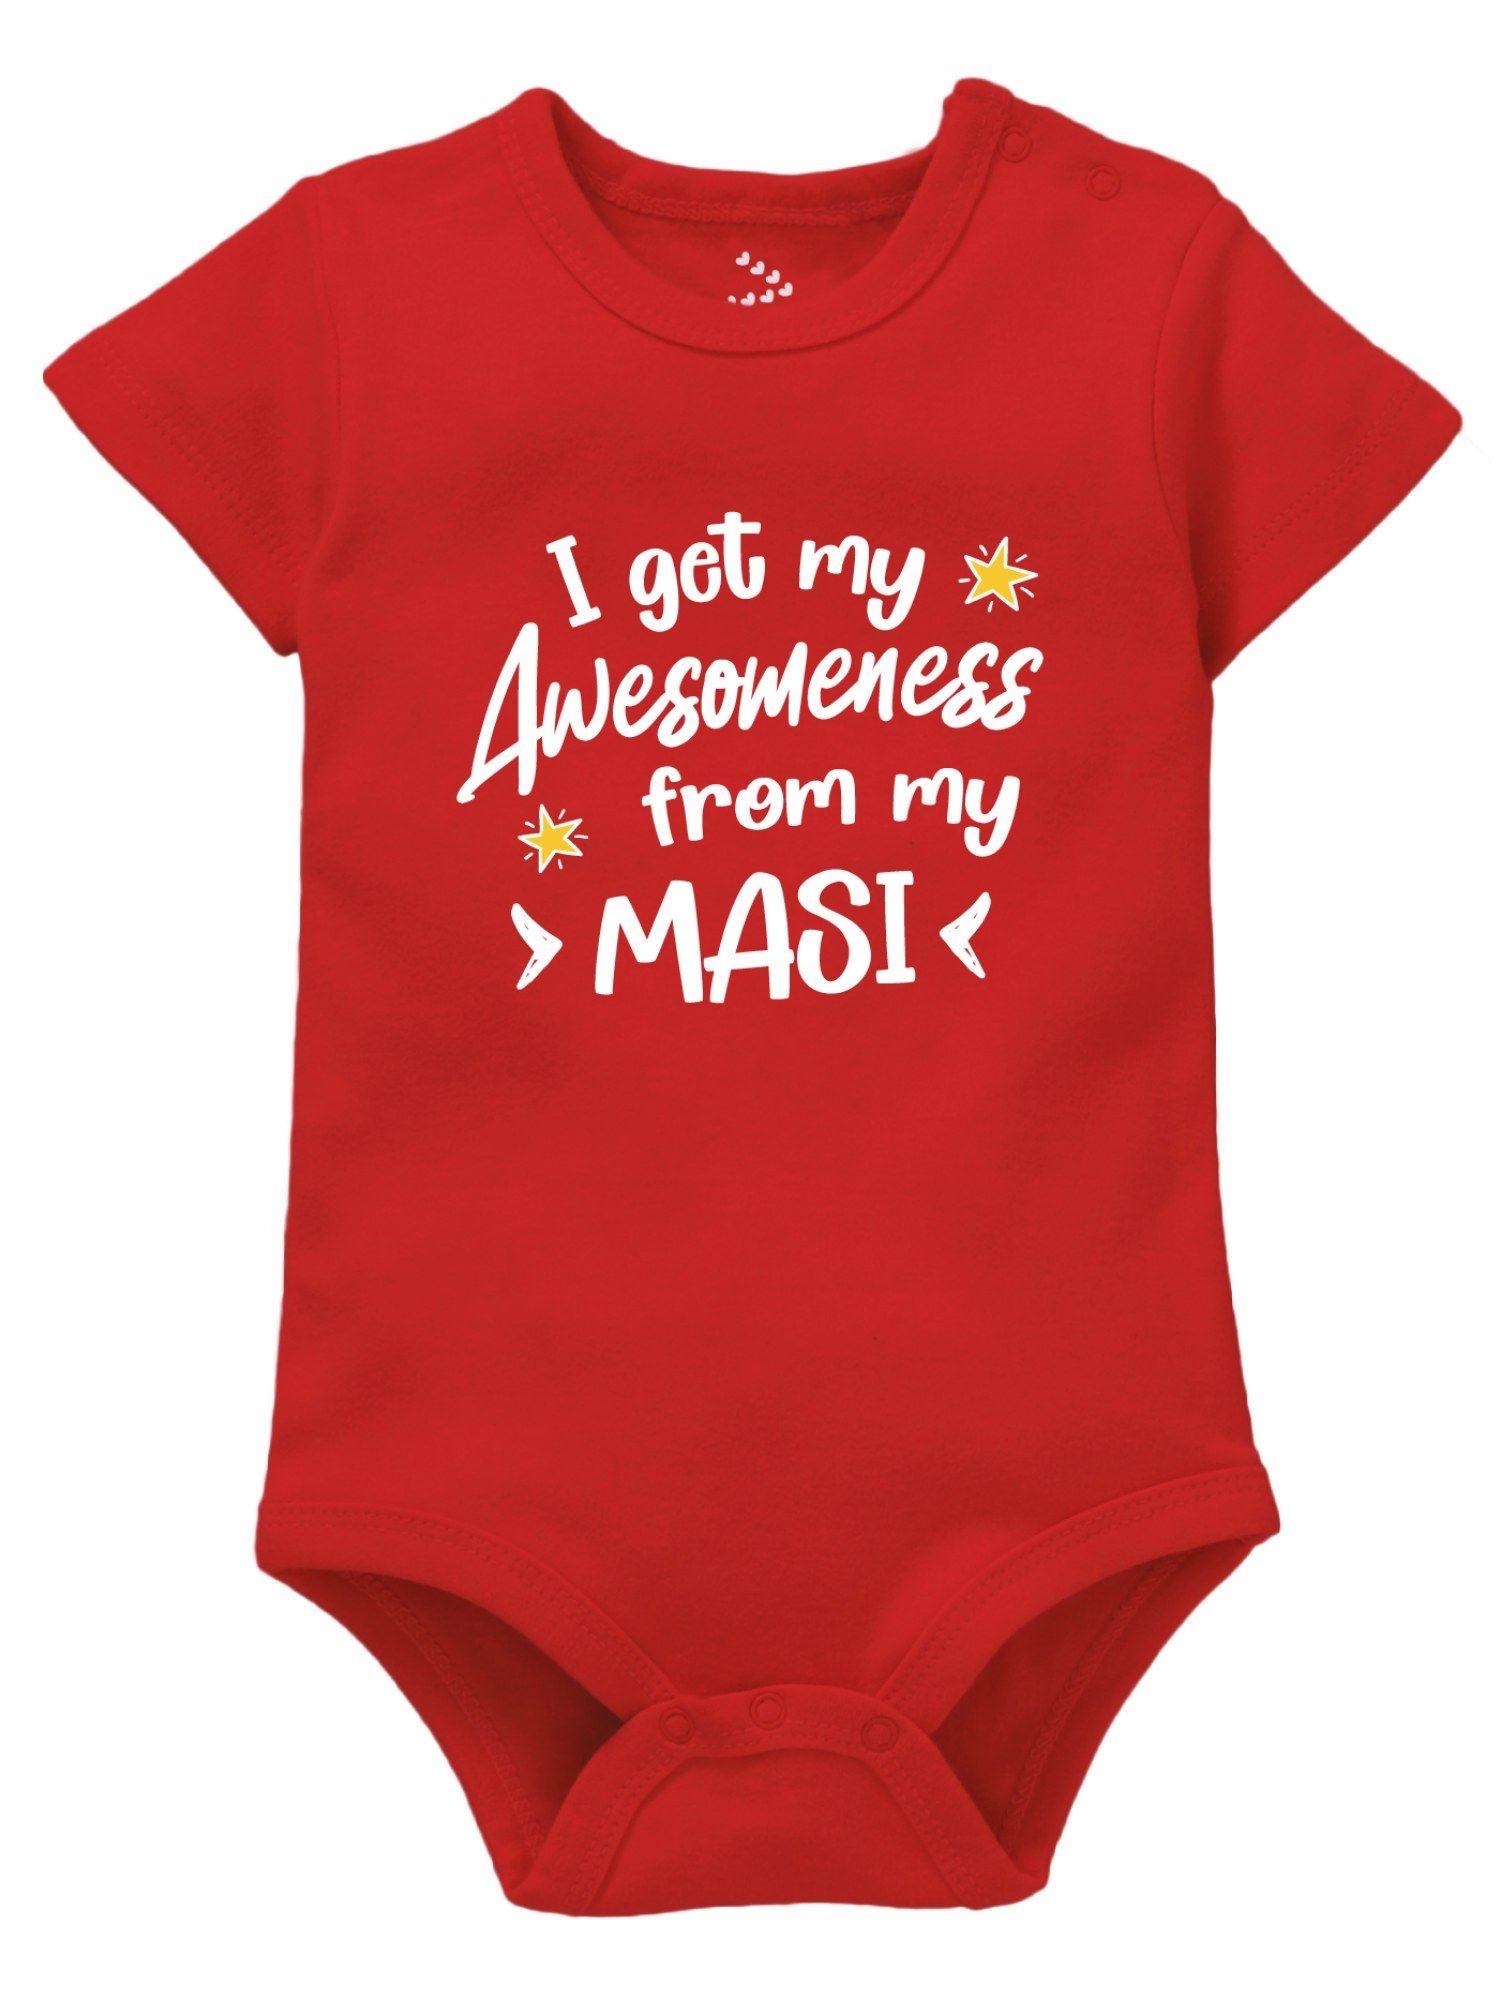 family baby bodysuit i get my awesomeness from masi red